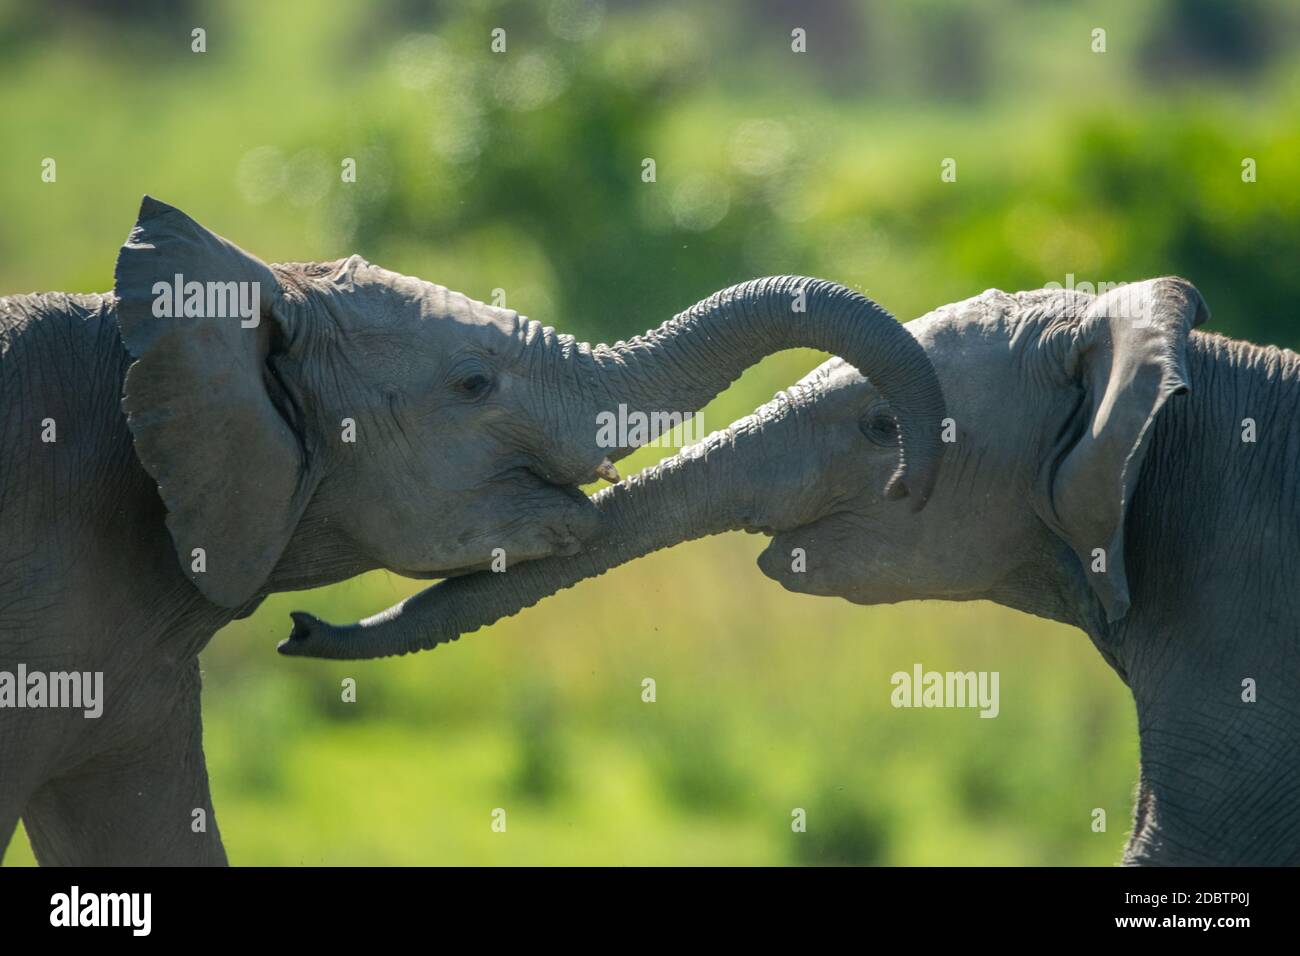 Close-up of two young elephants play fighting Stock Photo